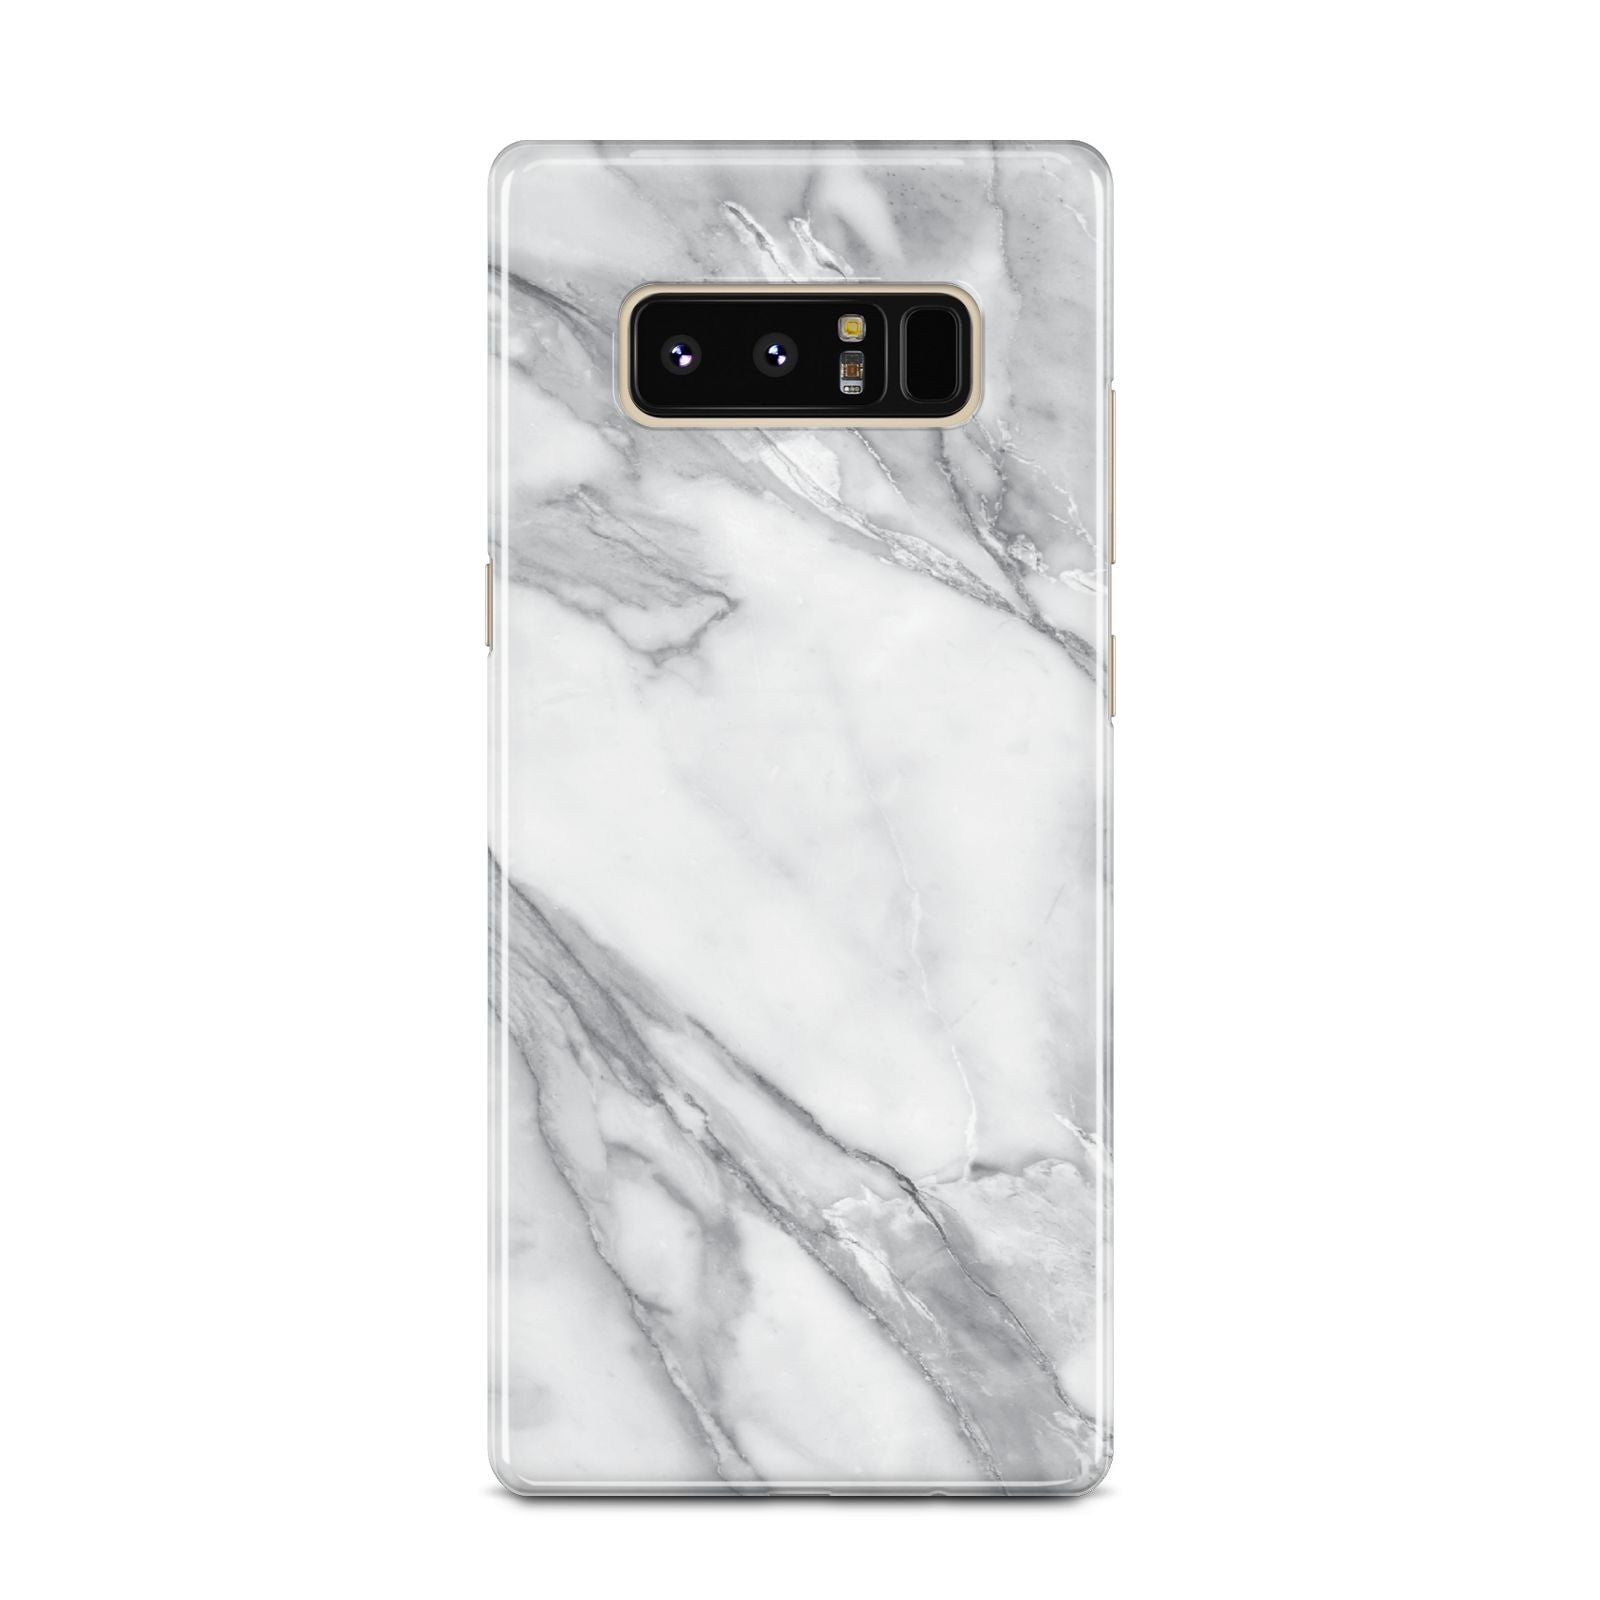 Faux Marble Effect White Grey Samsung Galaxy Note 8 Case